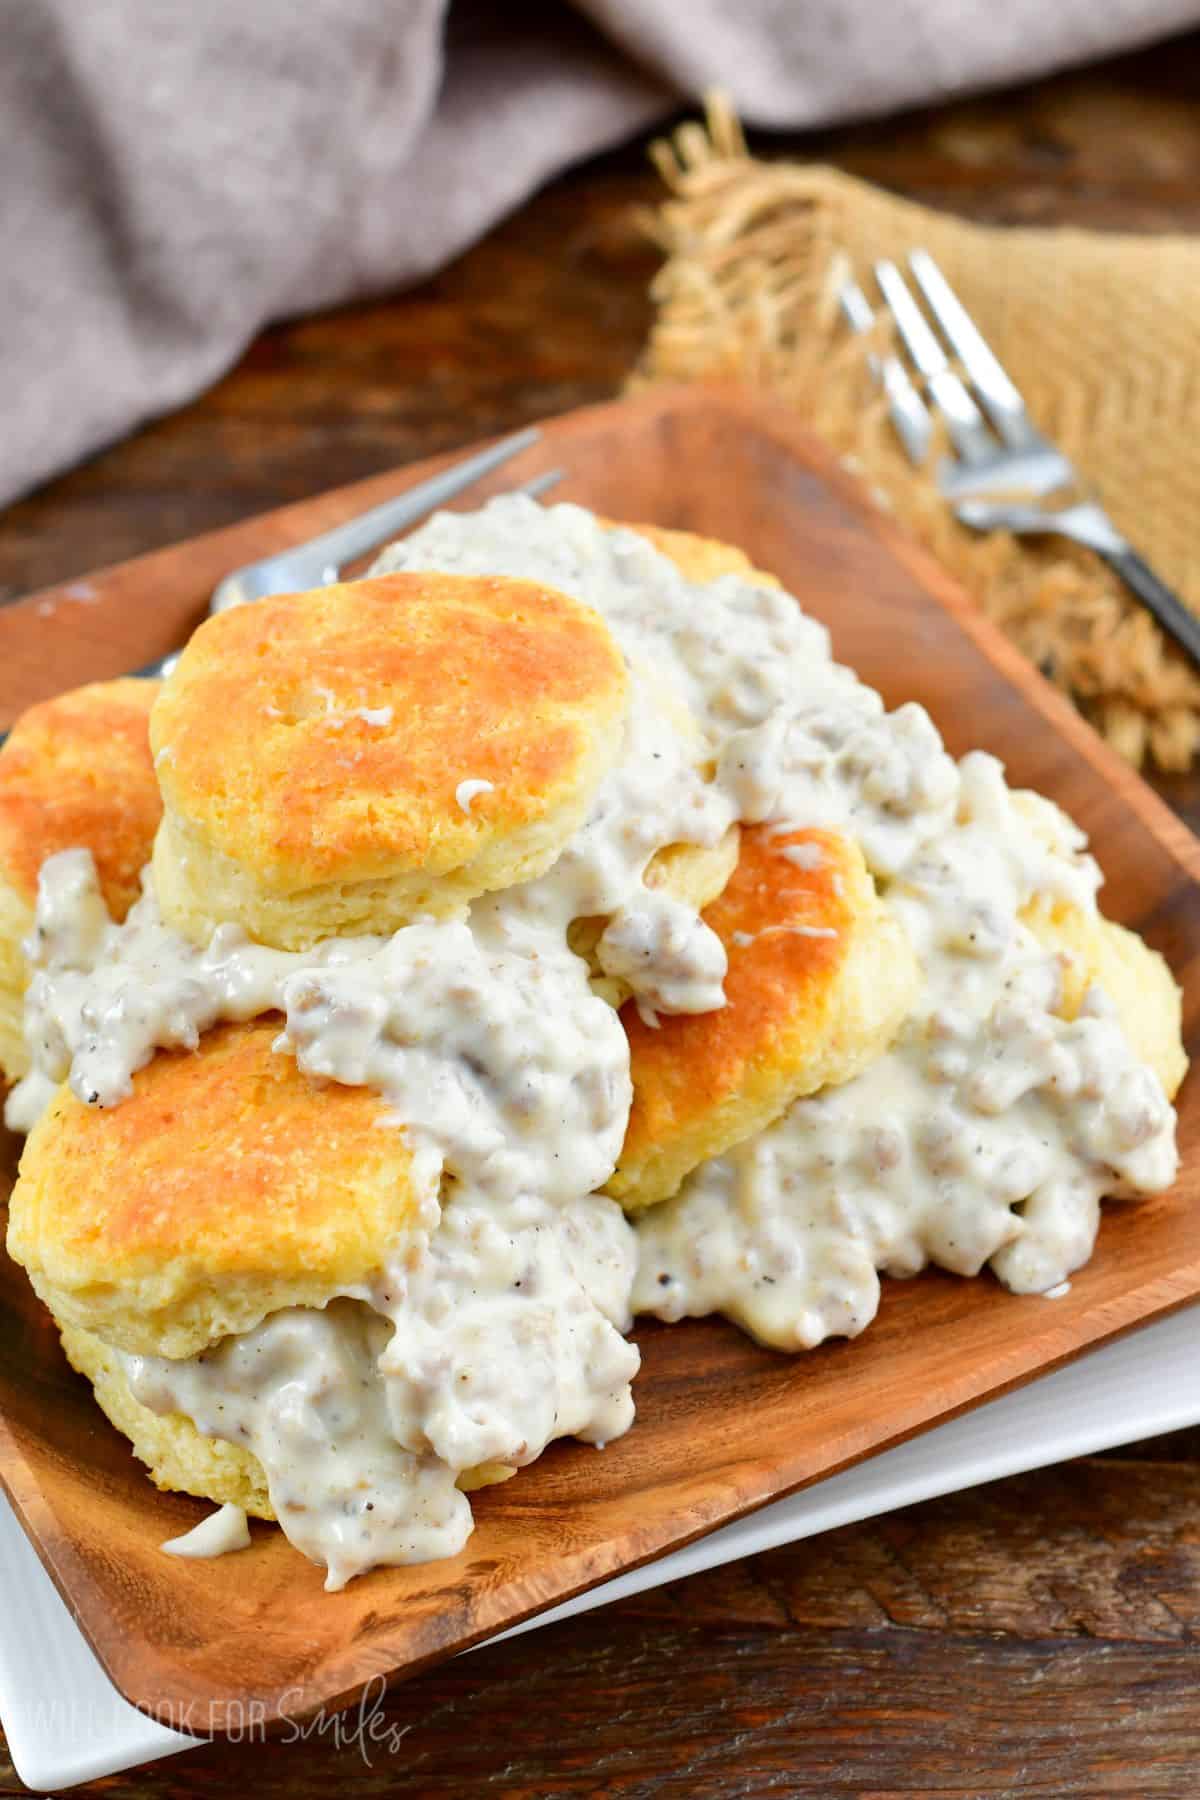 biscuits stacked up with sausage gravy over them on a wood plate.